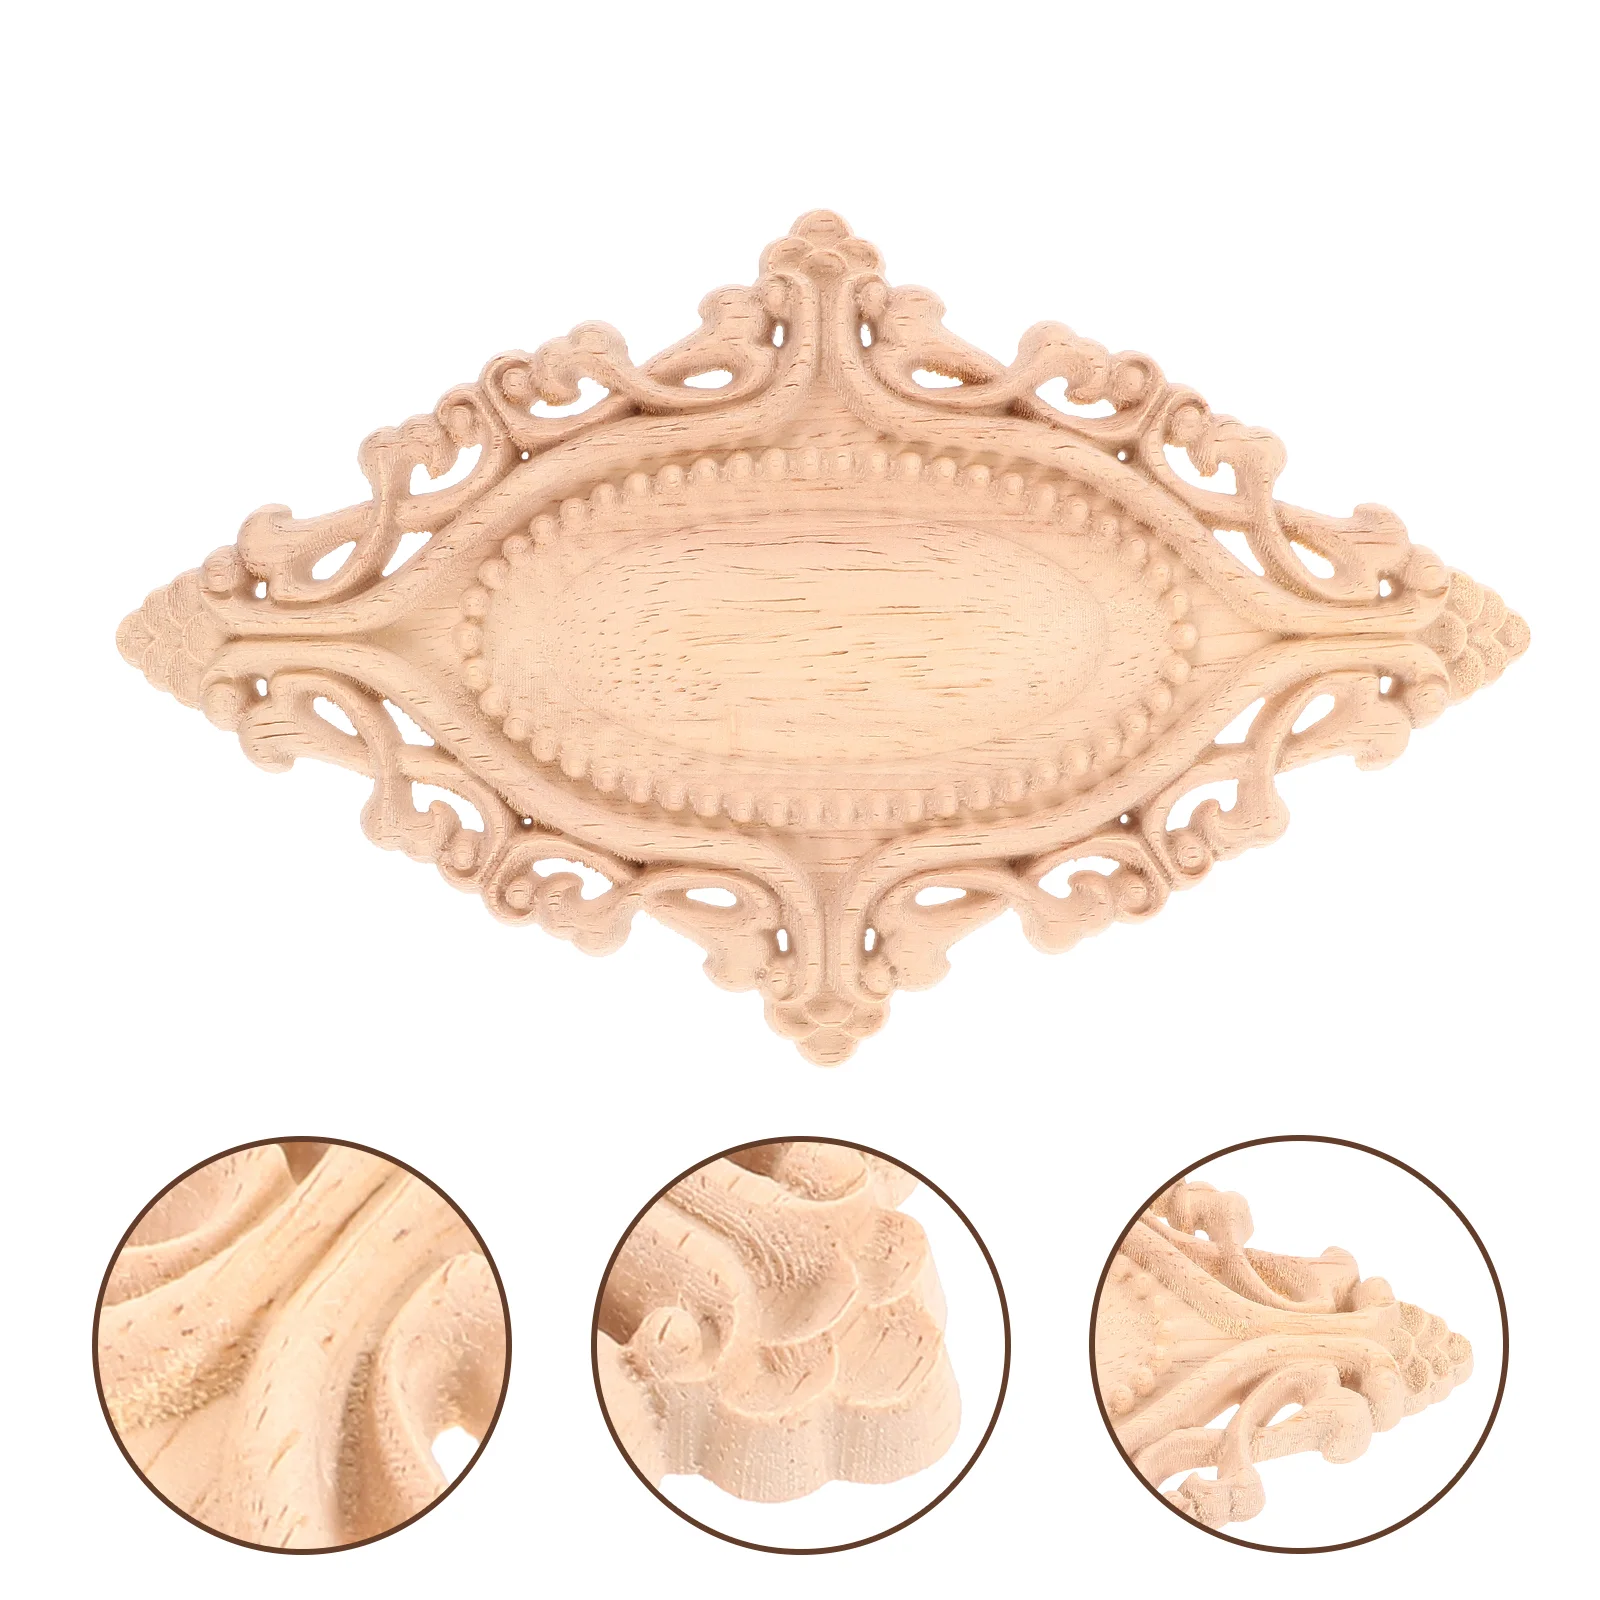 

Furniture Carving Applique Wood Carved Onlays Appliques Unpainted Wooden Home Decor Vintage Decals Doors The